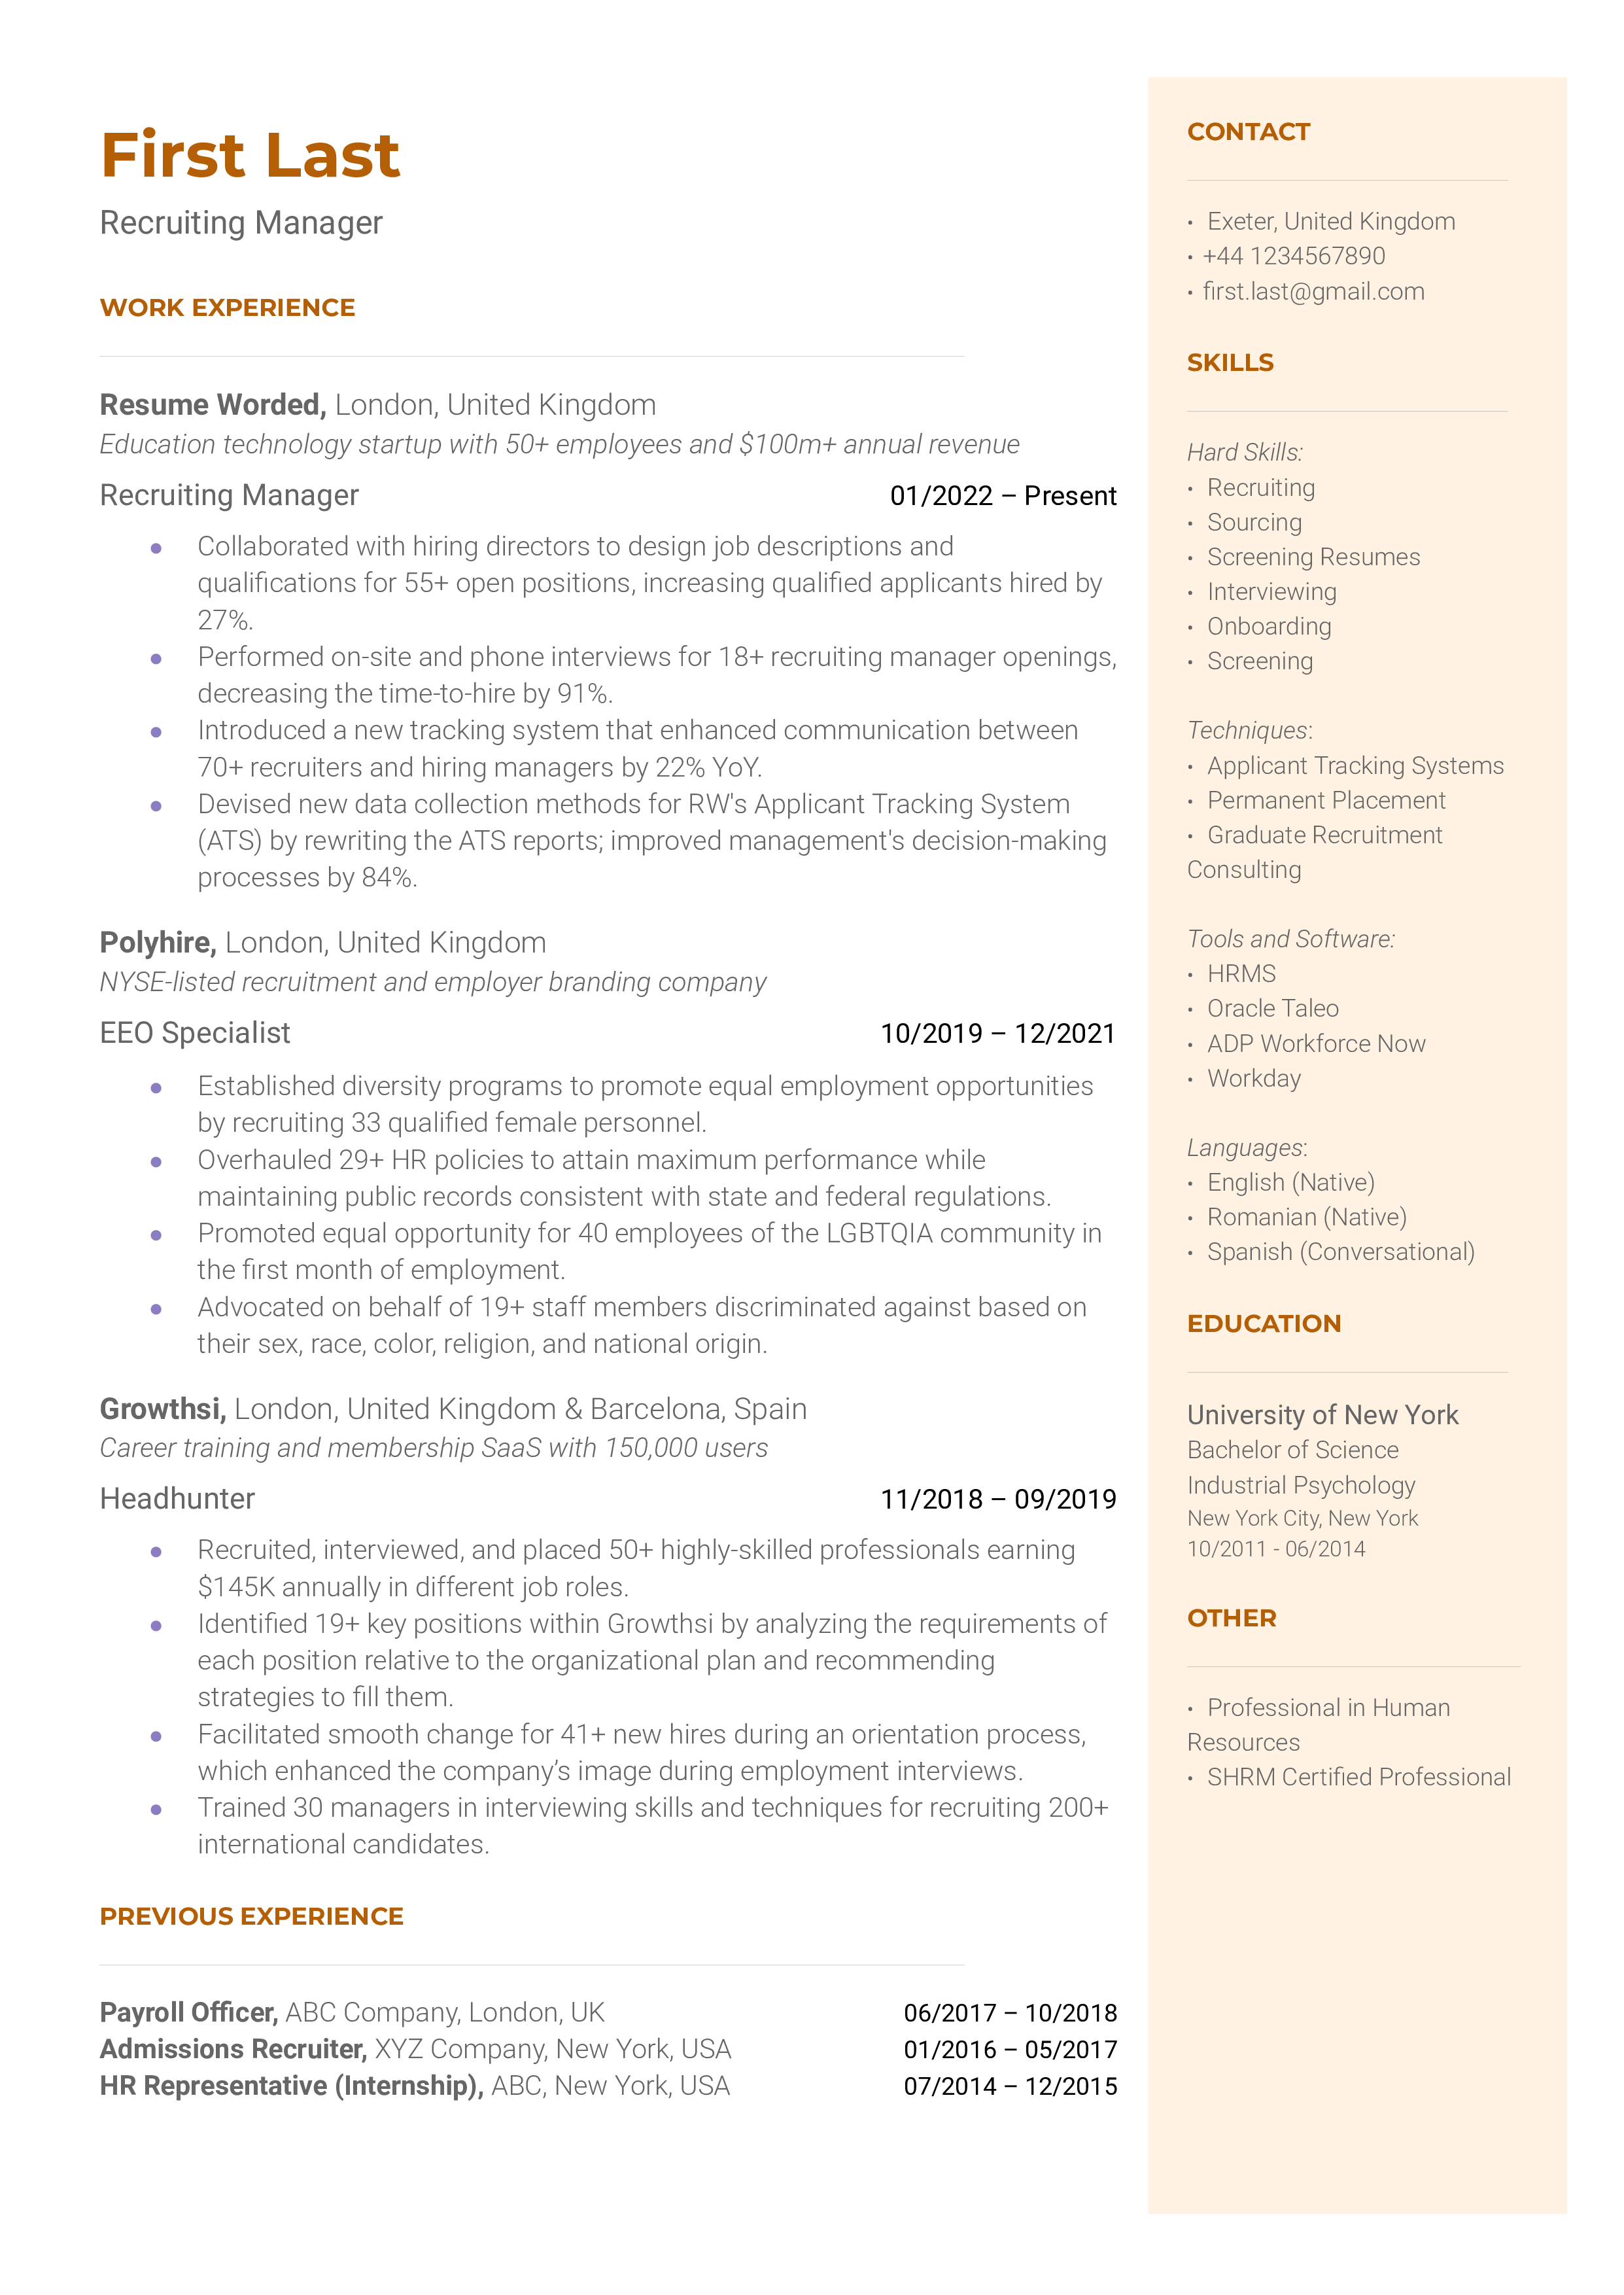 Recruiting Manager Resume Sample